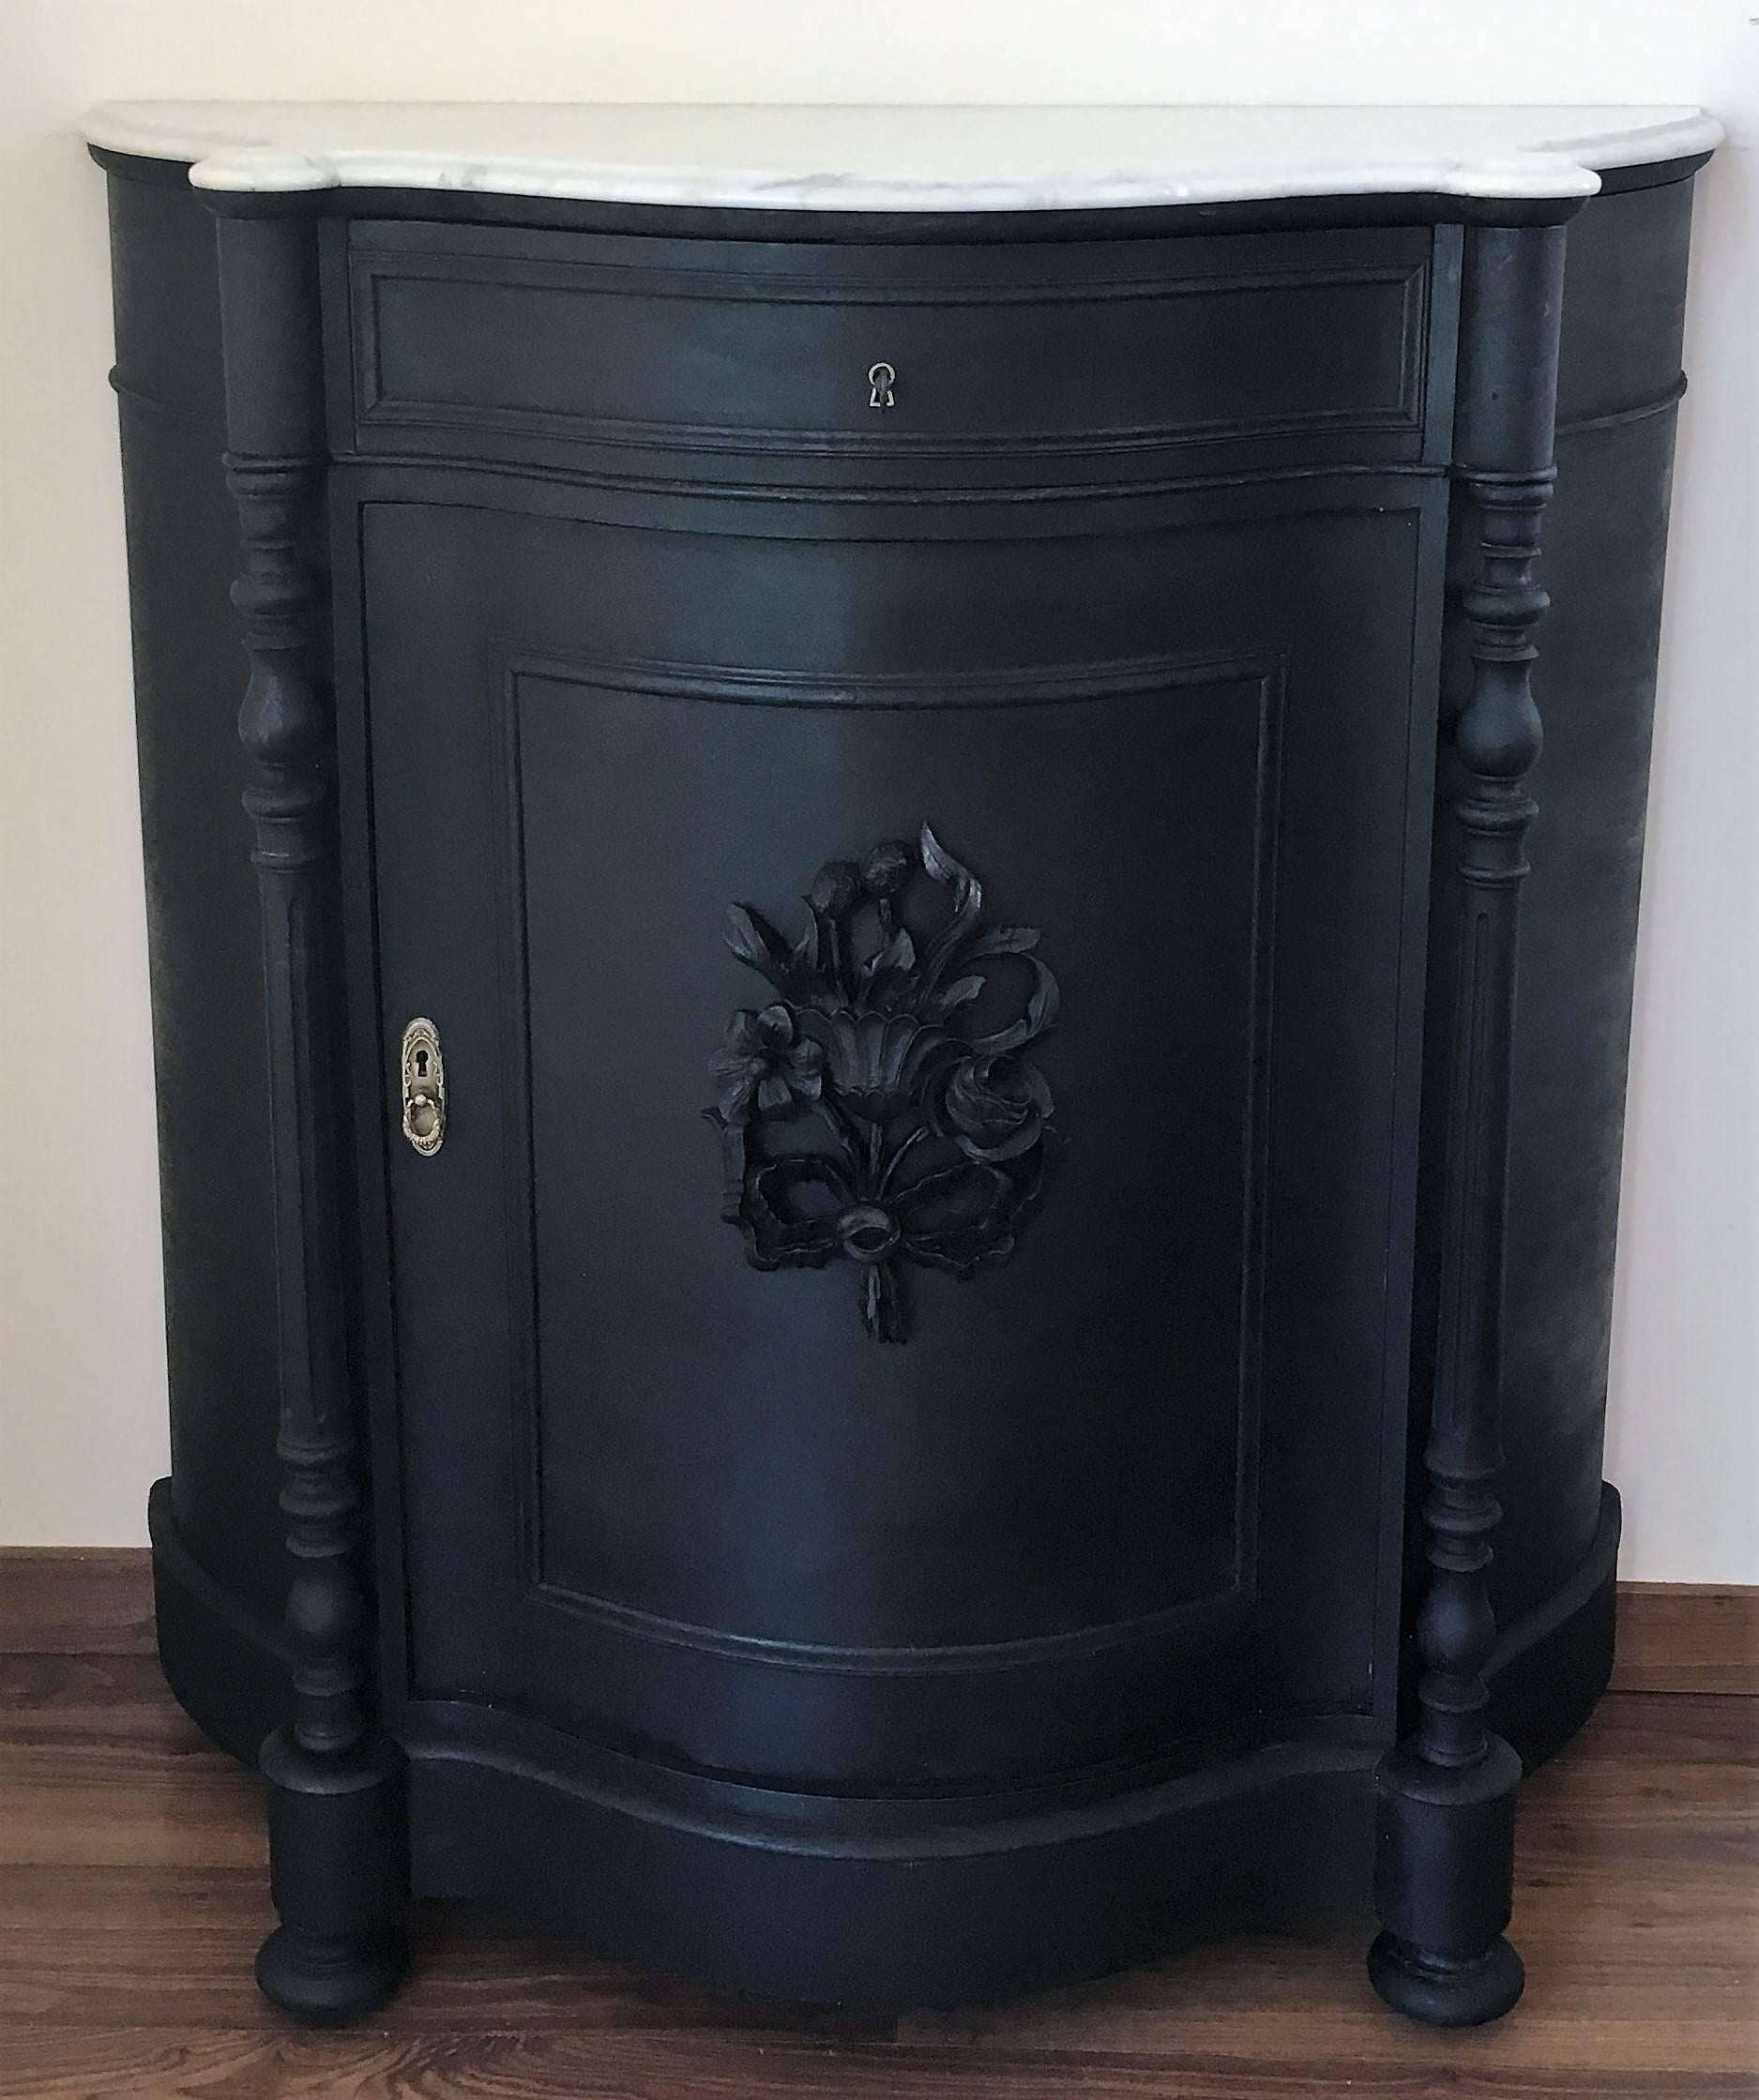 Renaissance black pine and white marble linen press with drawer

